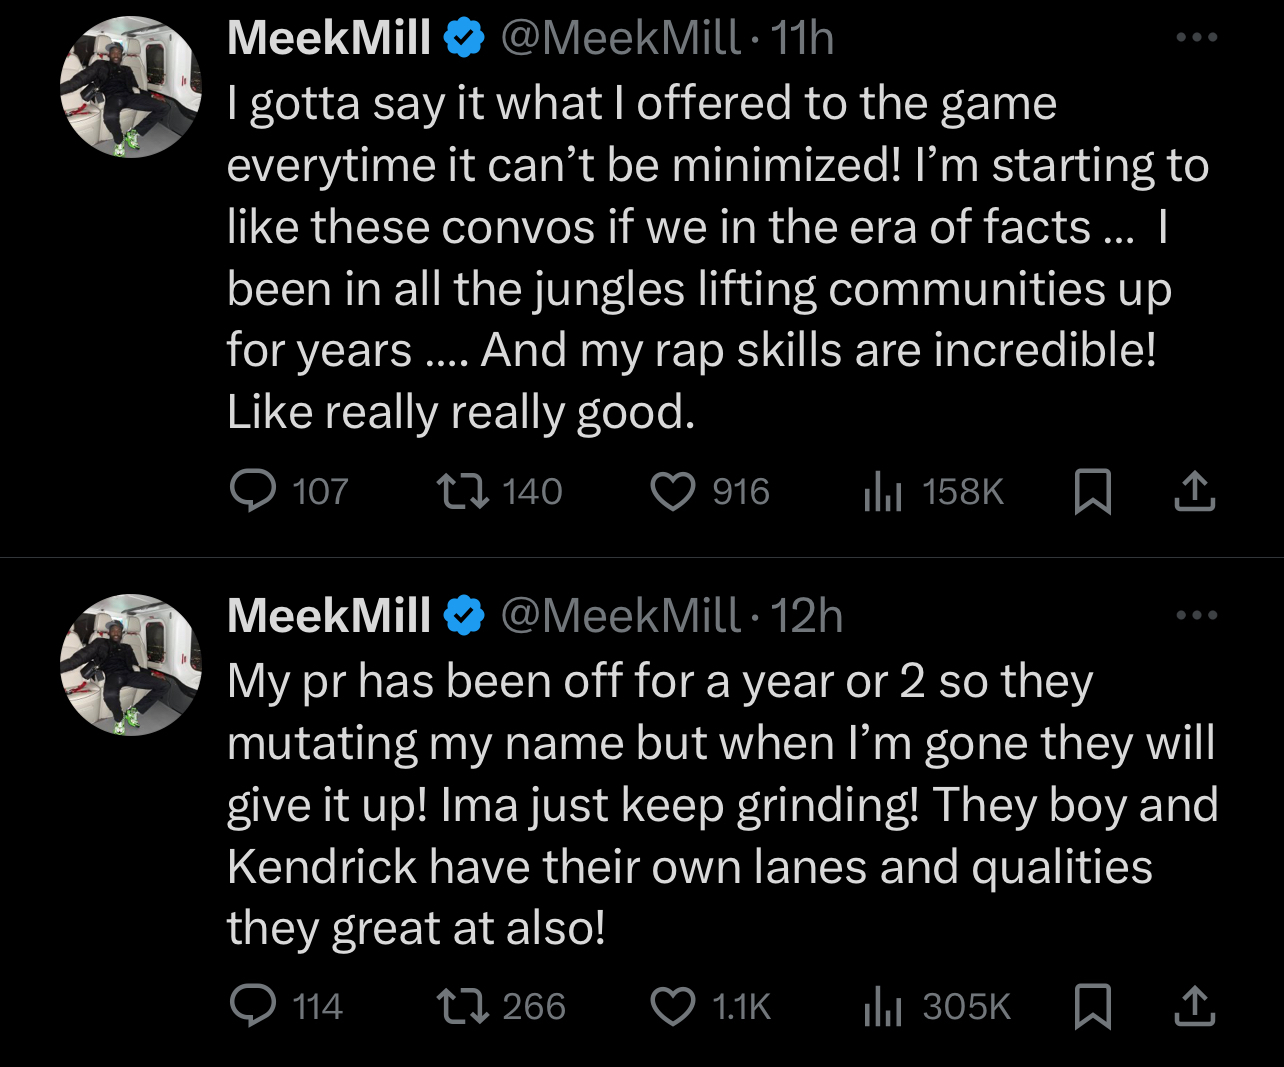 Two screenshots of tweets by rapper Meek Mill discussing his impact on the music industry and his work ethic